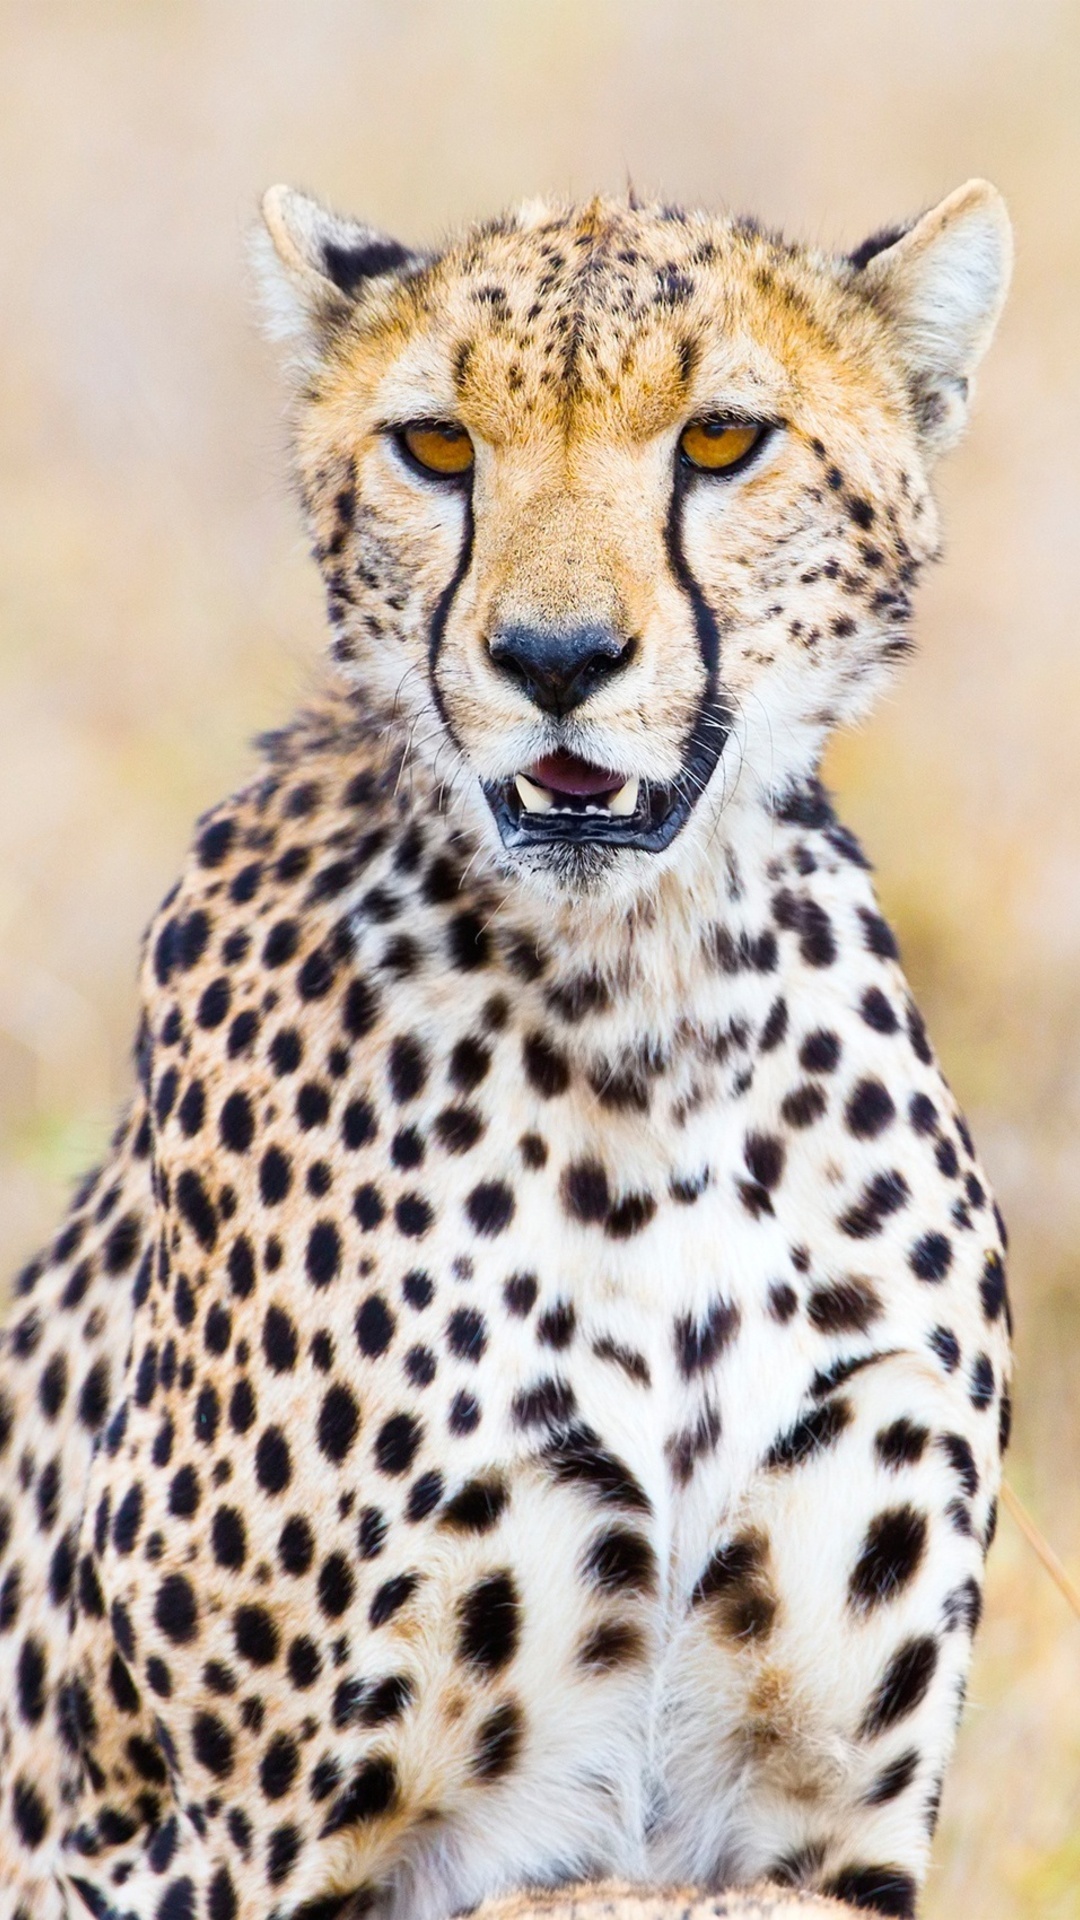 Cheetah iPhone wallpapers, Top-notch selection, High-definition images, Phone customization, 1080x1920 Full HD Handy